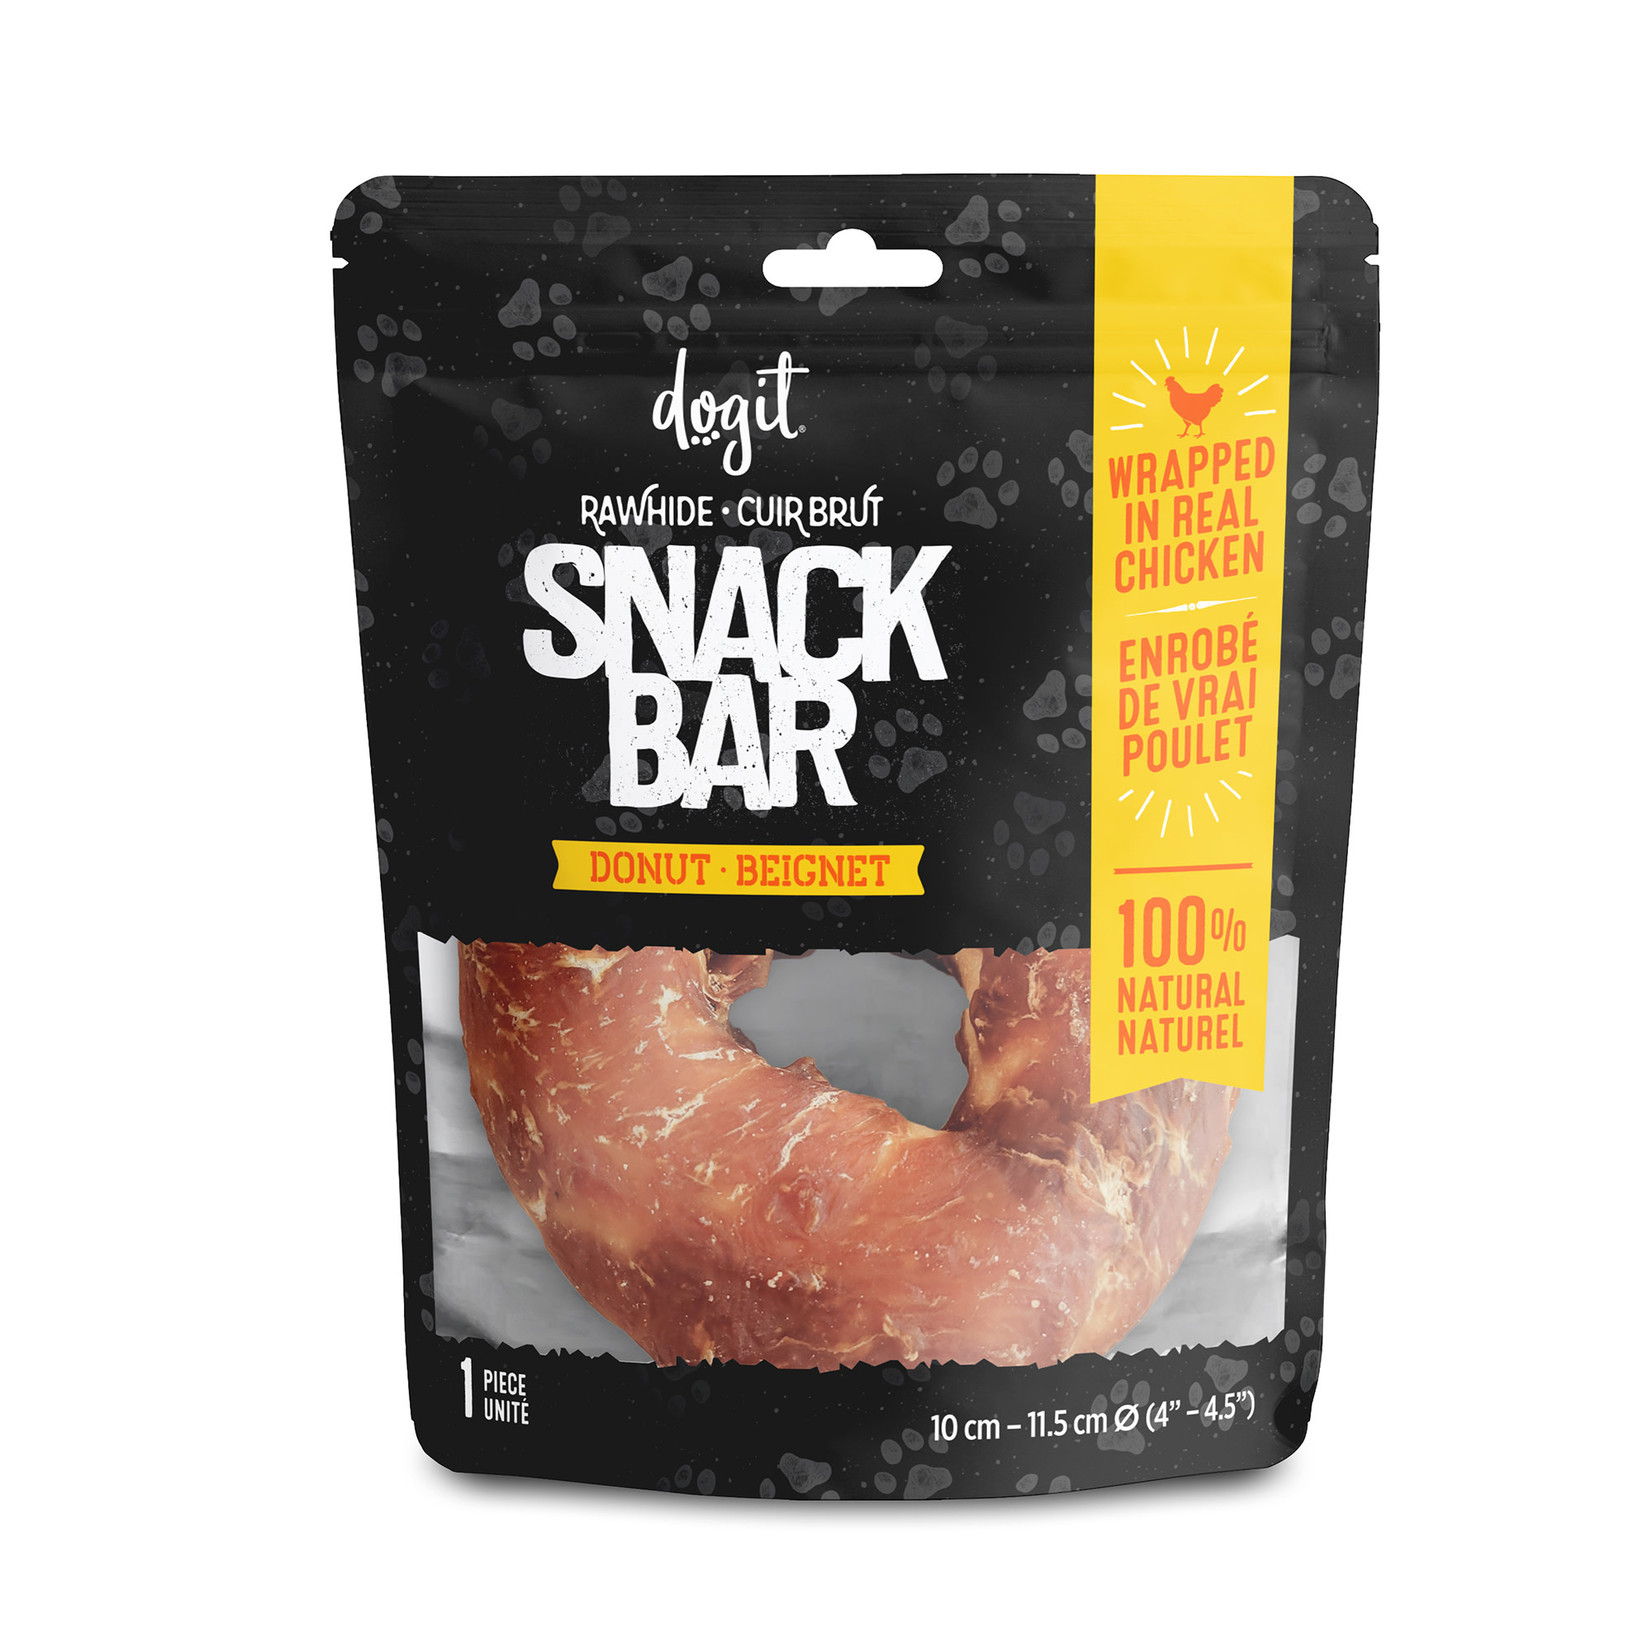 DOG IT Dogit Snack Bar Rawhide - Chicken-Wrapped Donut - 1 pc (10 - 11.4 cm/4 - 4.5 in dia.)